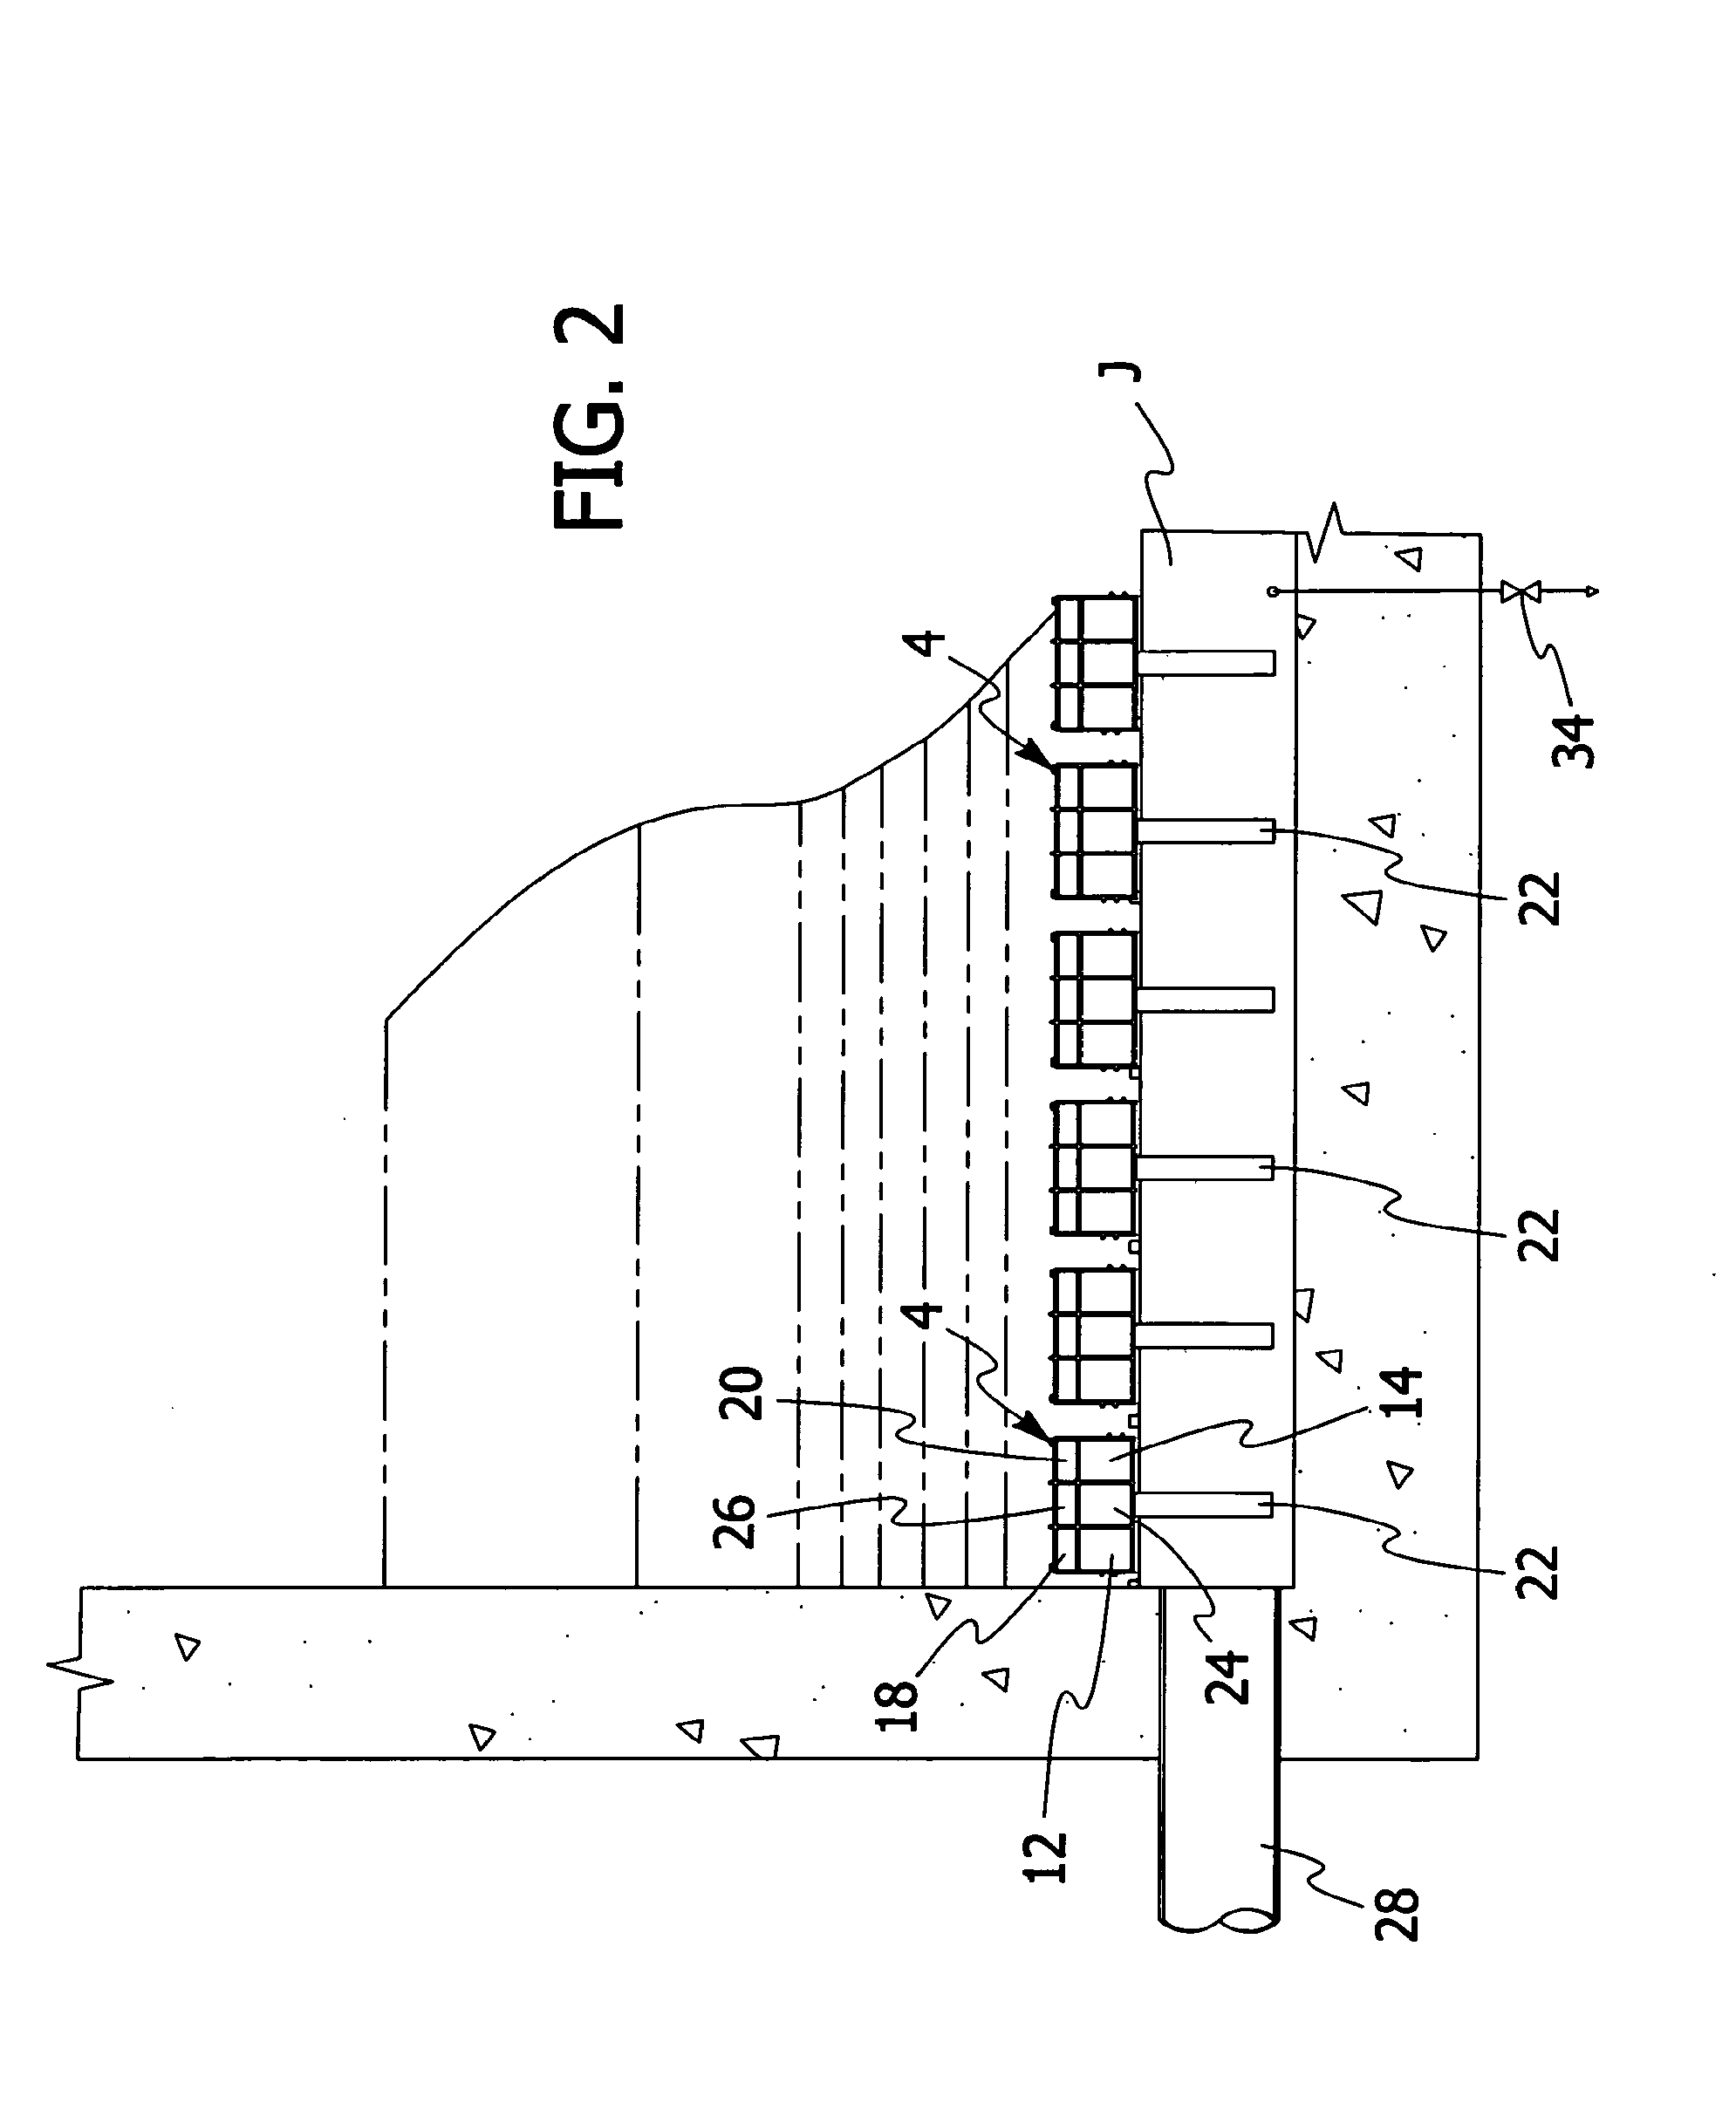 Flume system for a filter system including at least one filter having a filter bed that is periodically washed with liquid, gas or a combination thereof